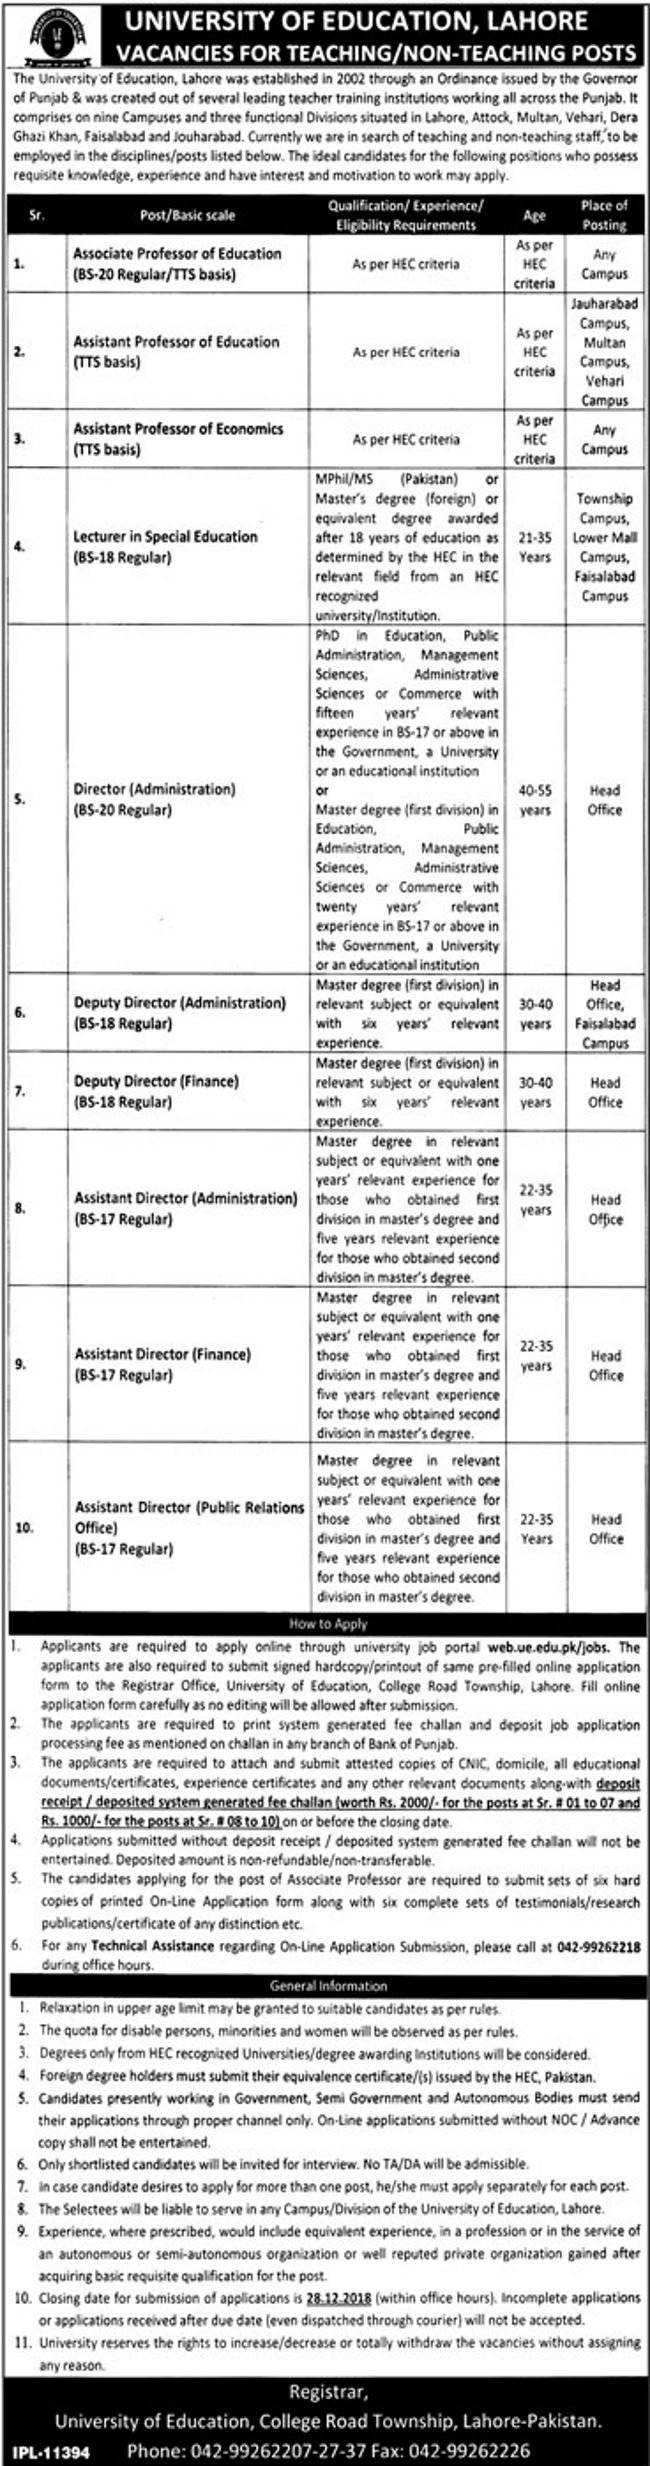 University of Education Lahore Jobs 2019 for Various Teaching & Non-Teaching Staff